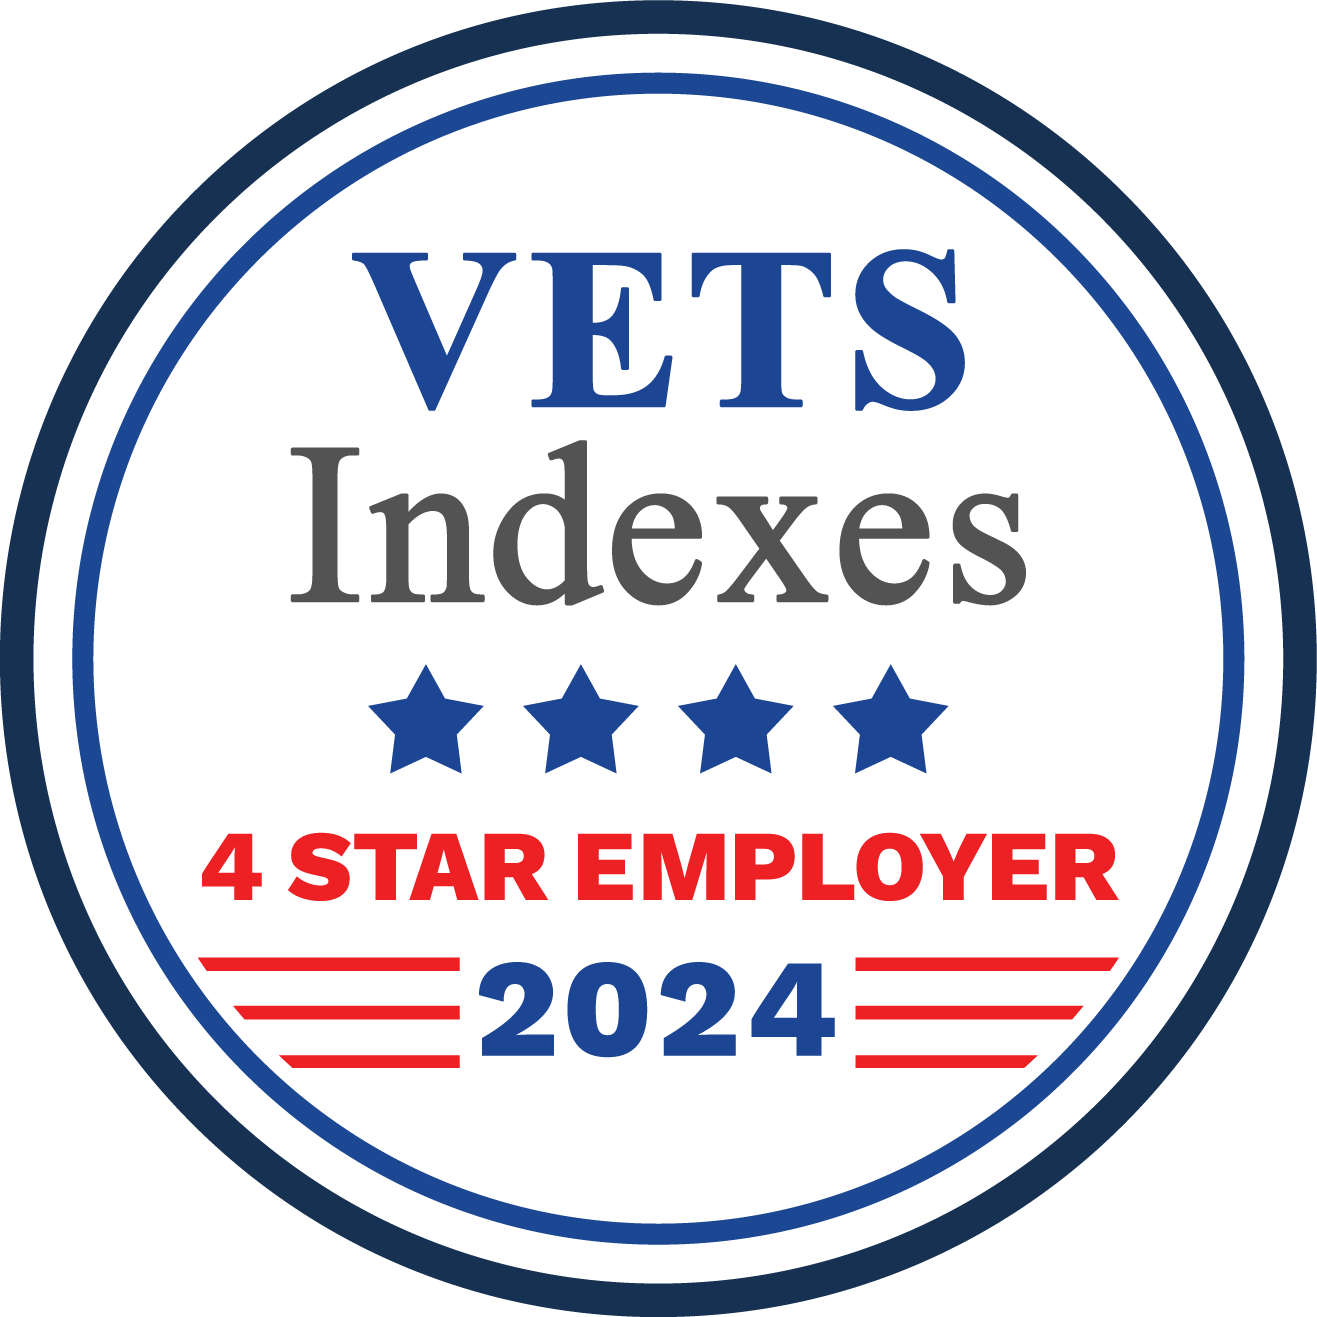 vets-indexes-4-star-employer-2024